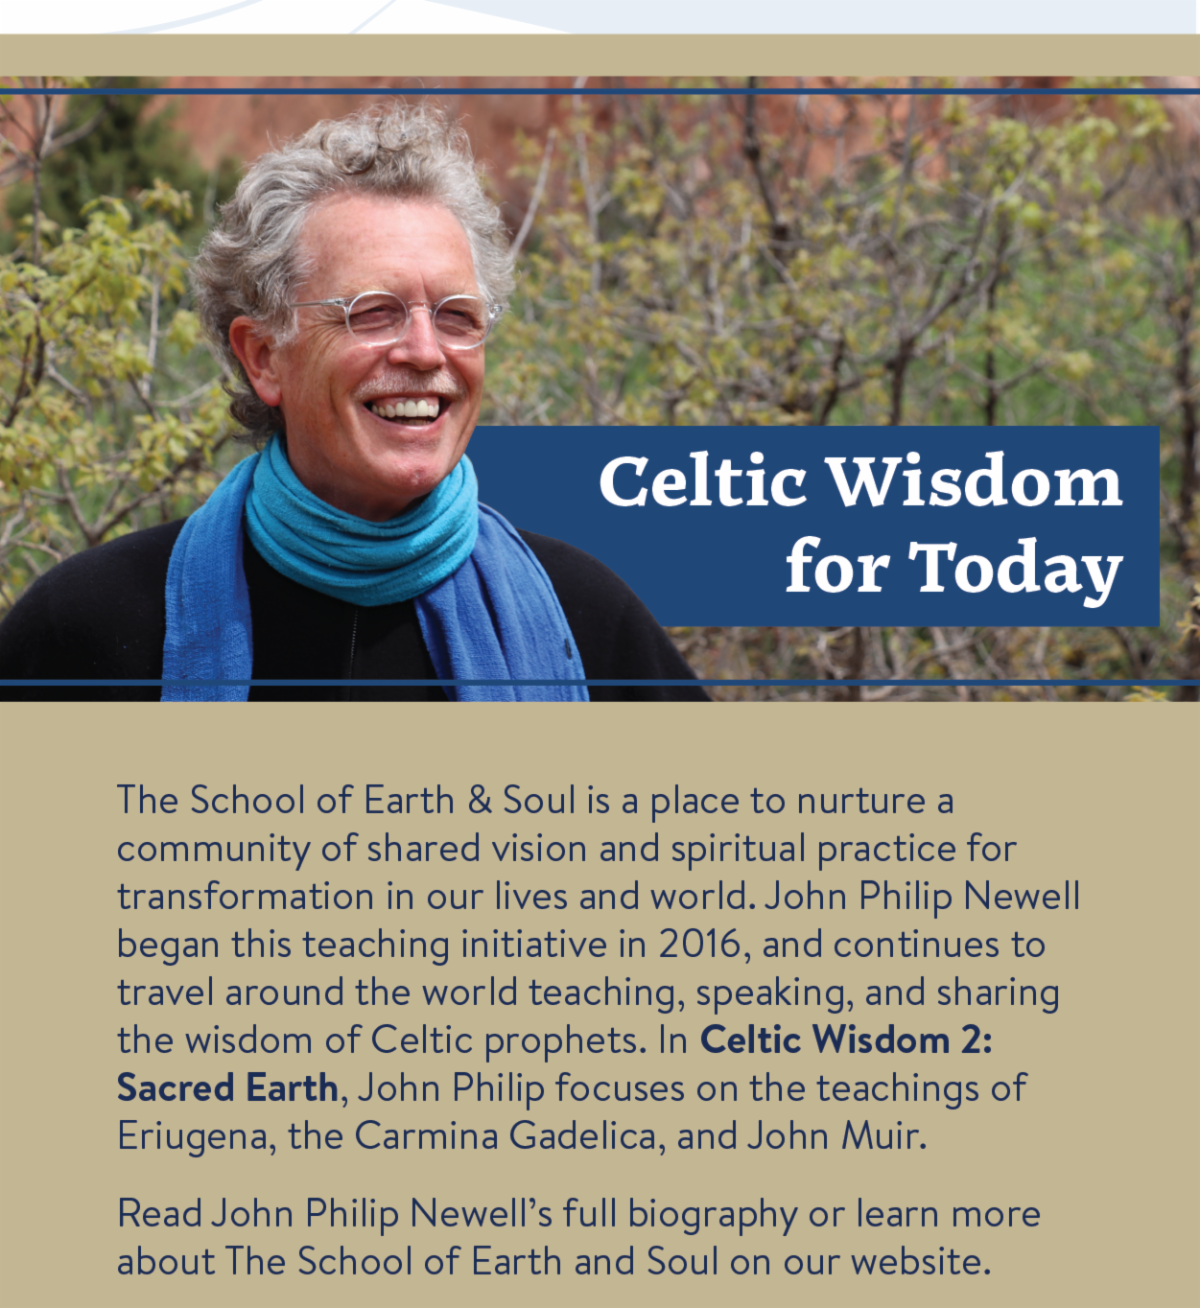 Celtic Wisdom for Today - The School of Earth & Soul is a place to nurture a community of shared vision and spiritual practice for transformation in our lives and world. John Philip Newell began this teaching initiative in 2016, and continues to travel around the world teaching, speaking, and sharing the wisdom of Celtic prophets. In Celtic Wisdom 2: Sacred Earth, John Philip focuses on the teachings of Eriugena, the Carmina Gadelica, and John Muir.  Read John Philip Newell’s full biography or learn more about The School of Earth and Soul on our website.